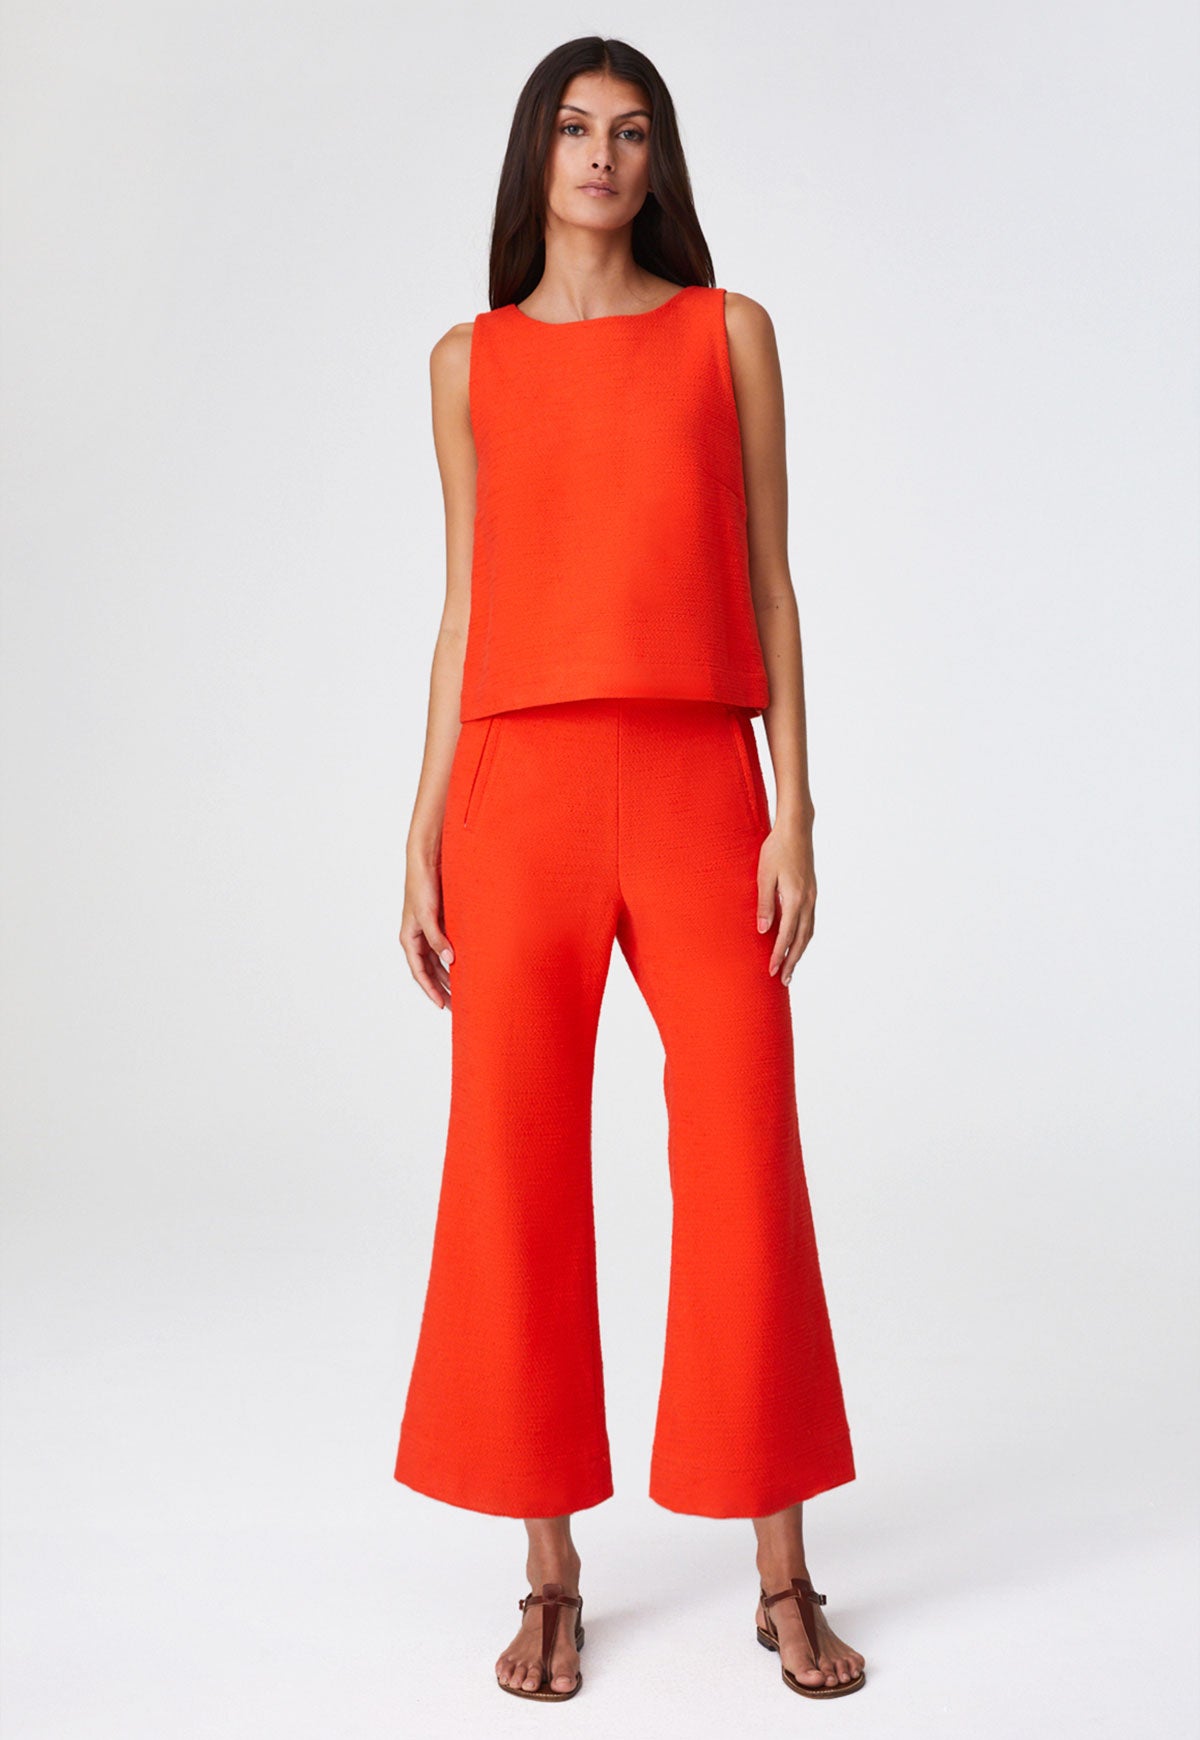 THE FLARE TROUSER in TOMATO TEXTURED COTTON